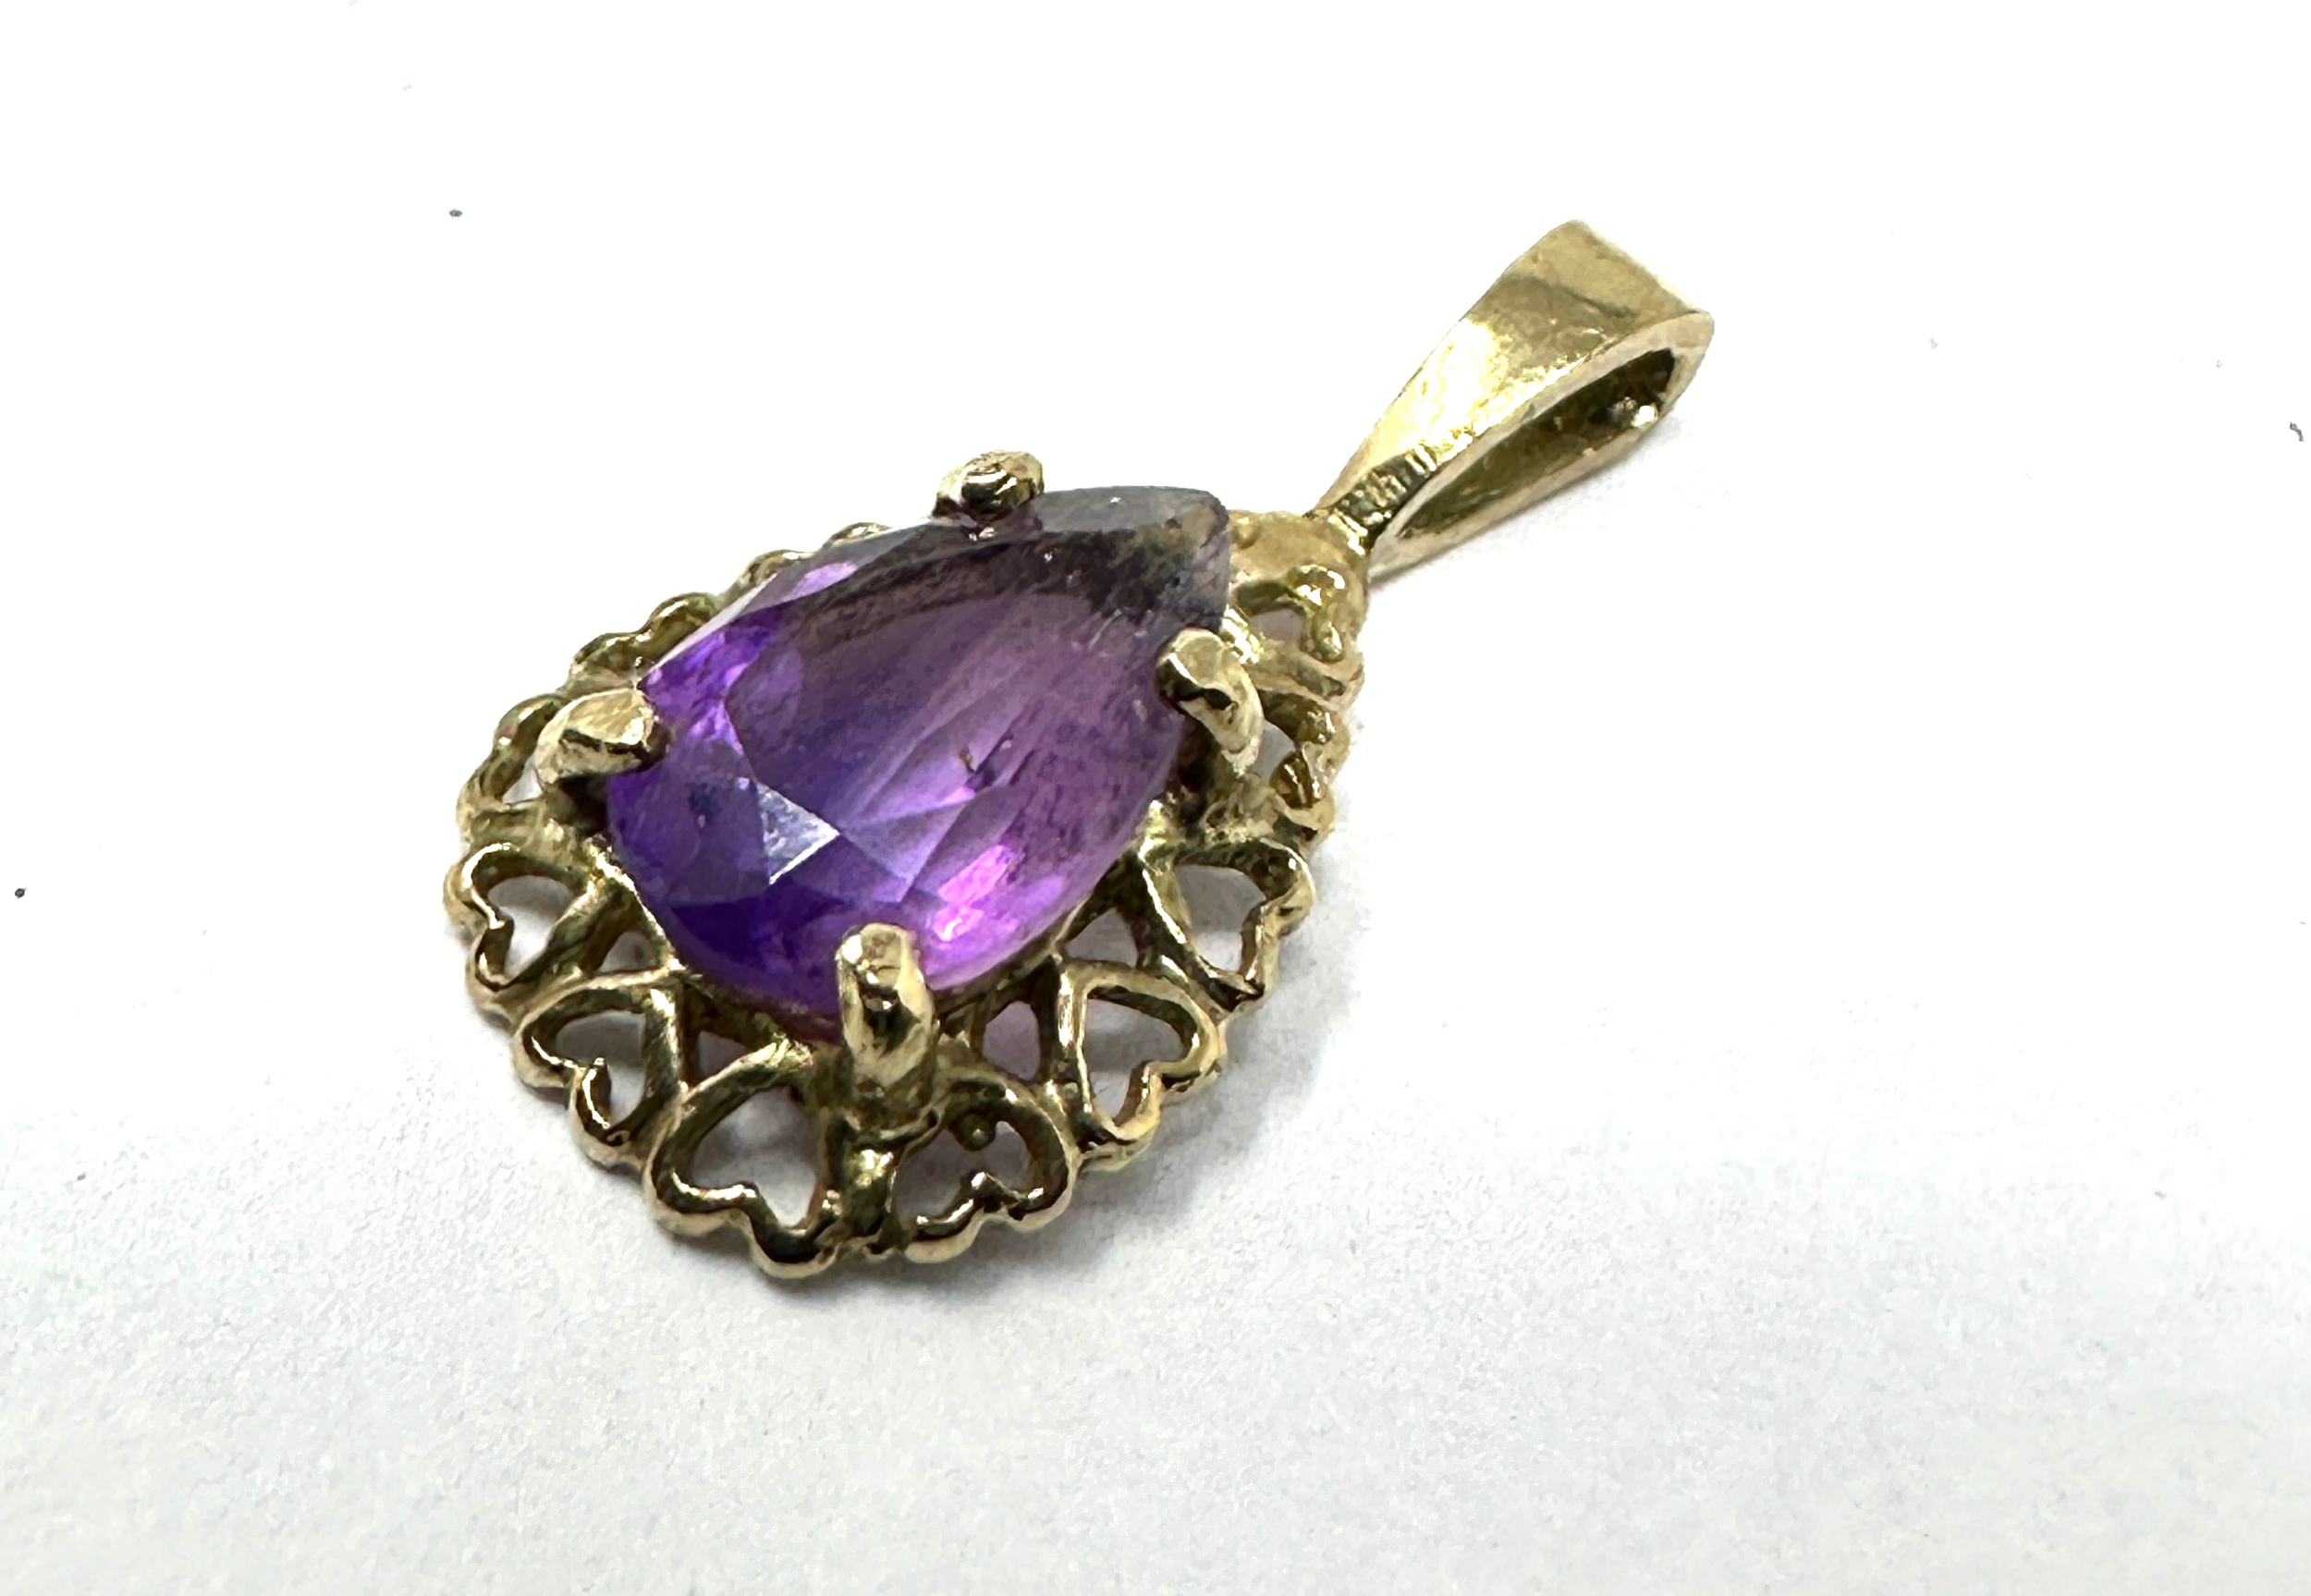 9ct gold amethyst pendant weight .8g